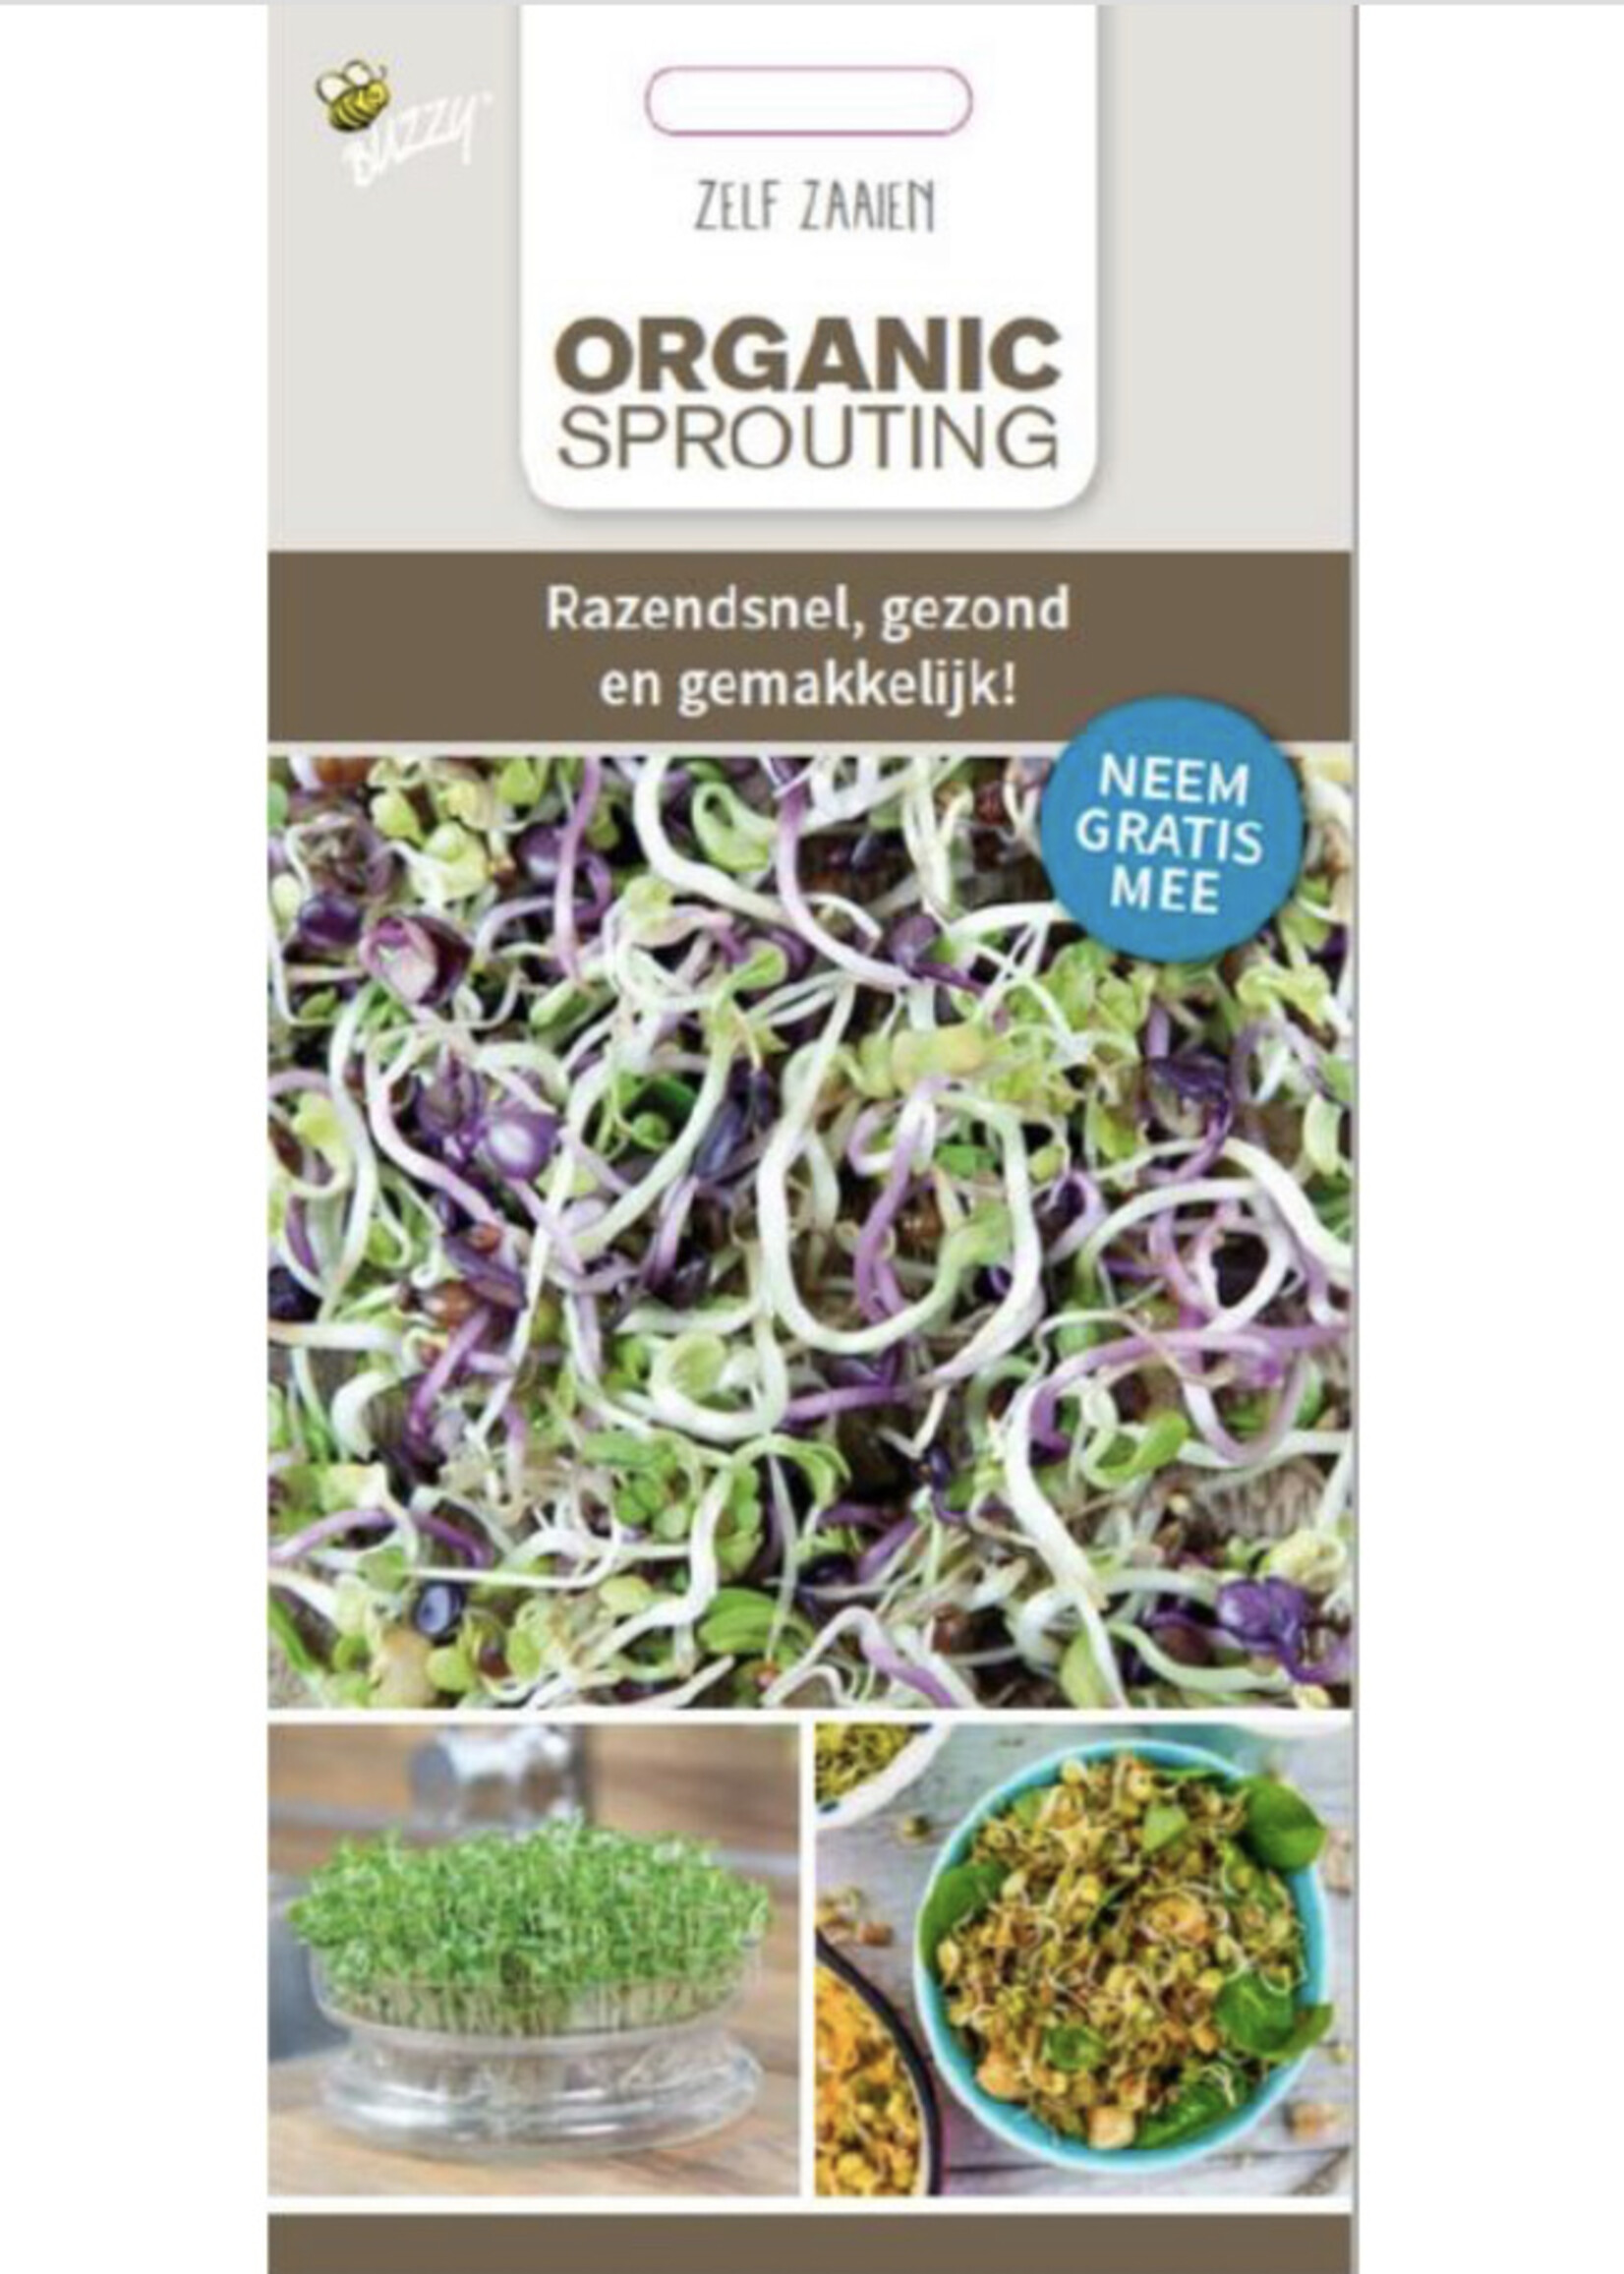 Buzzy Brochure Buzzy Organic Sprouting Ned